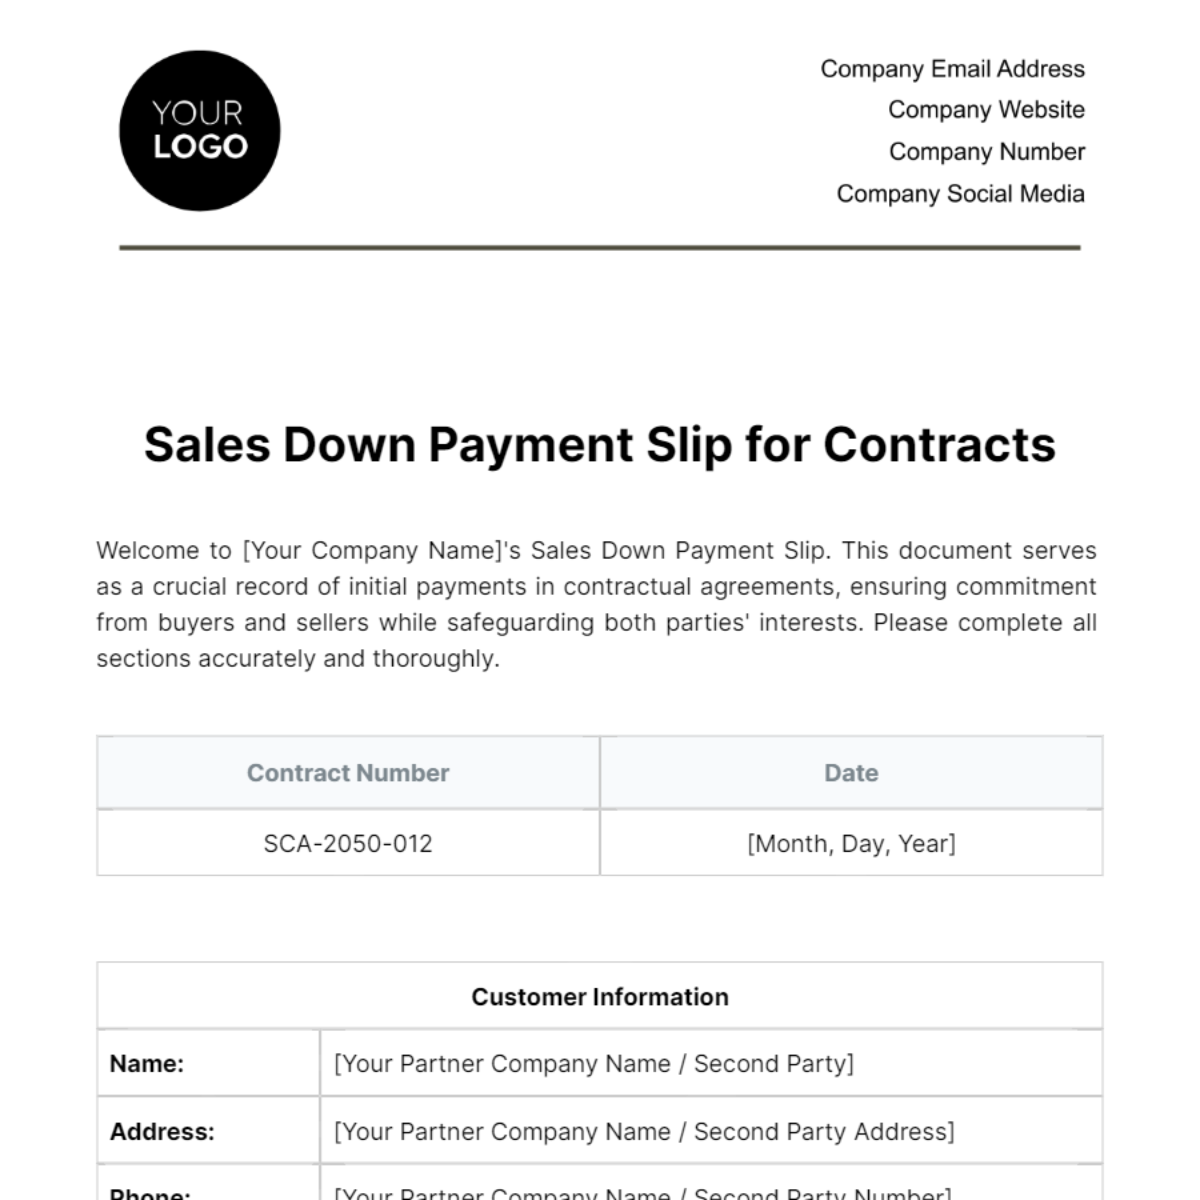 Free Sales Down Payment Slip for Contracts Template